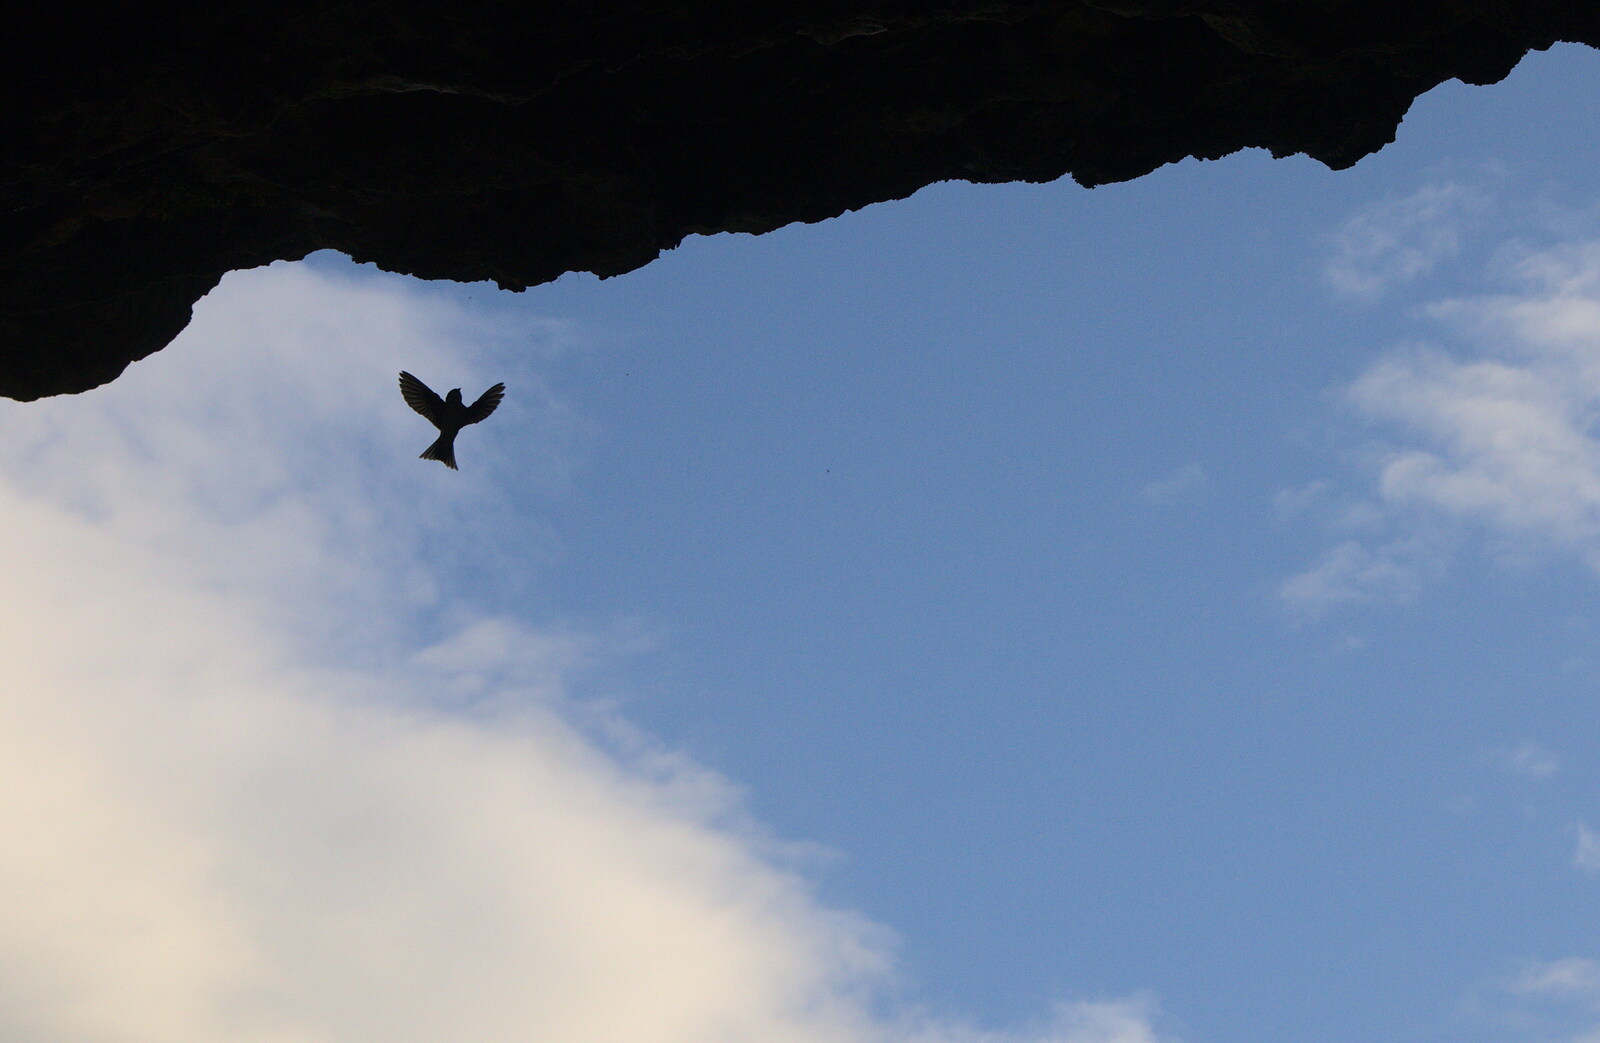 A Housemartin comes back to its nest from Camping at Silver Strand, Wicklow, County Wicklow, Ireland - 7th August 2014